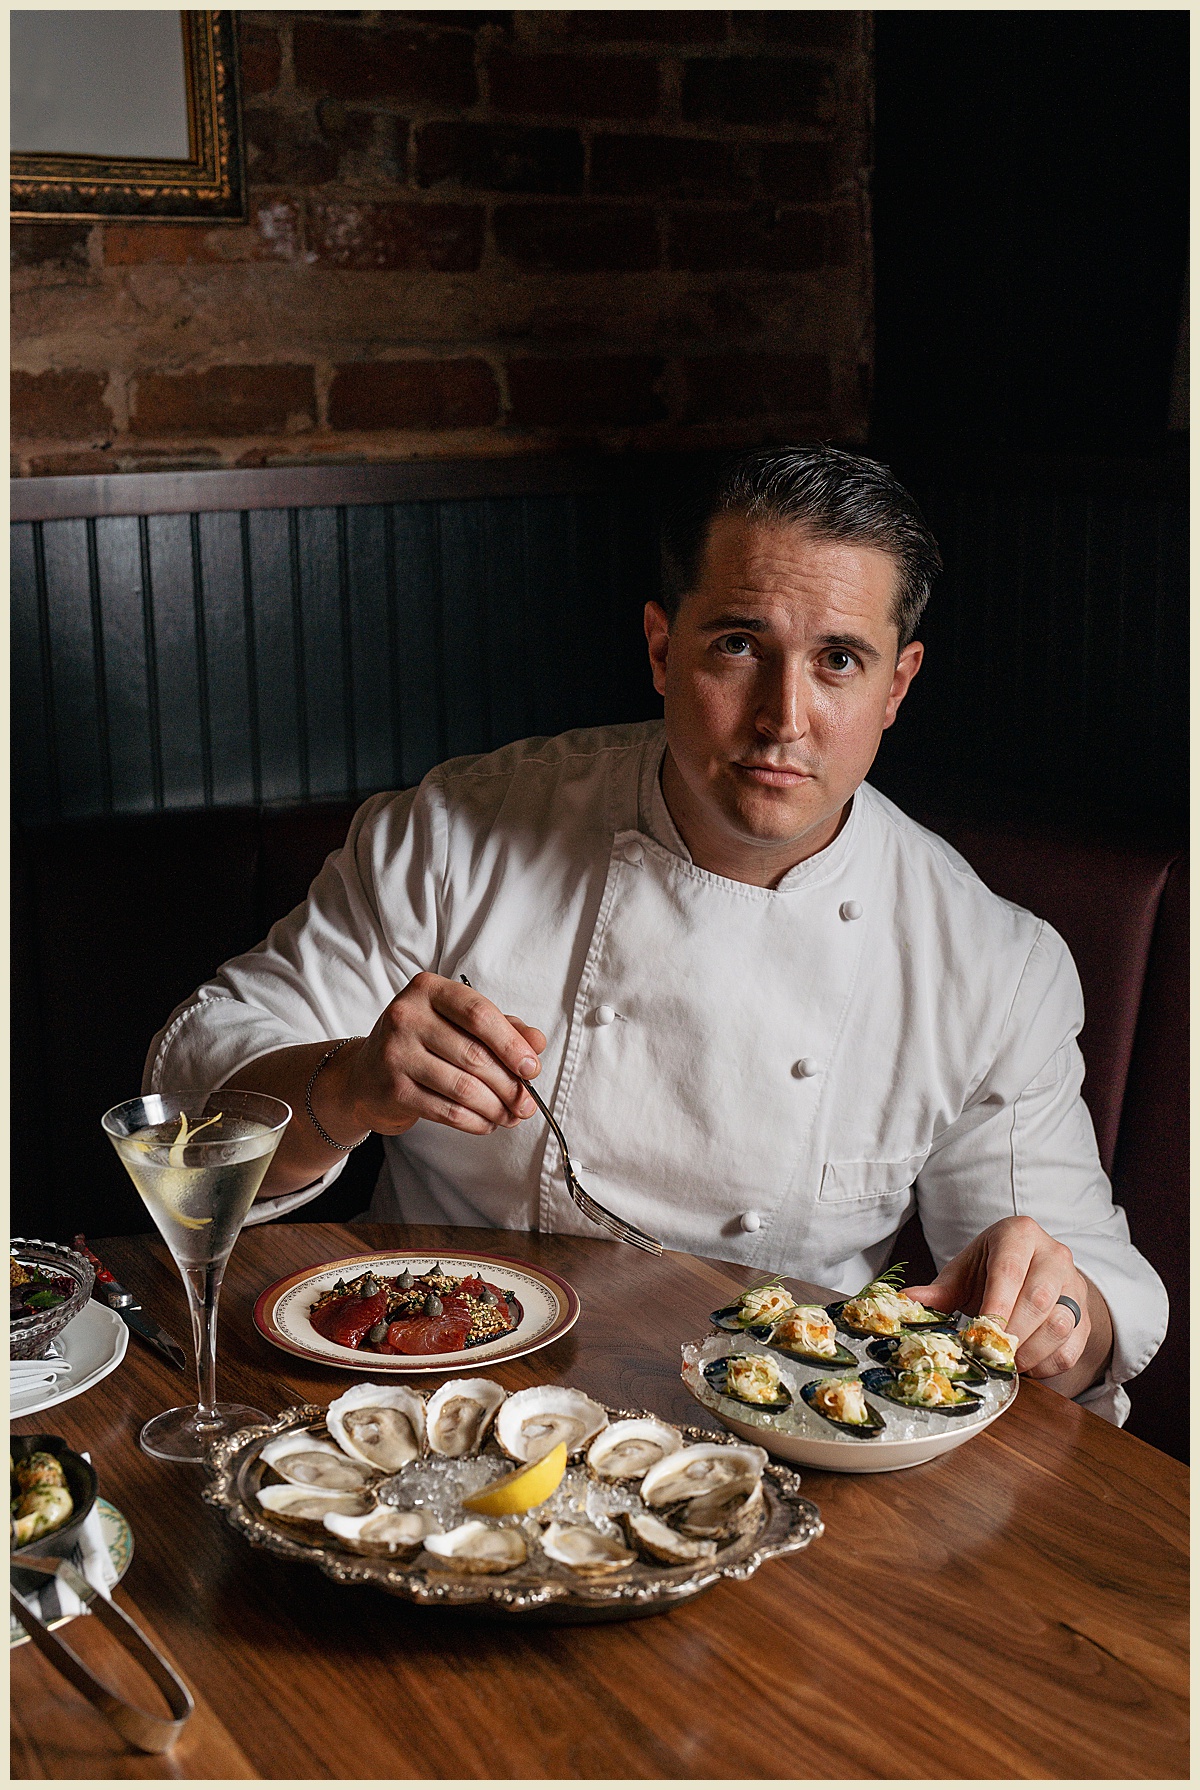 Chef portrait photography in Greenville, SC